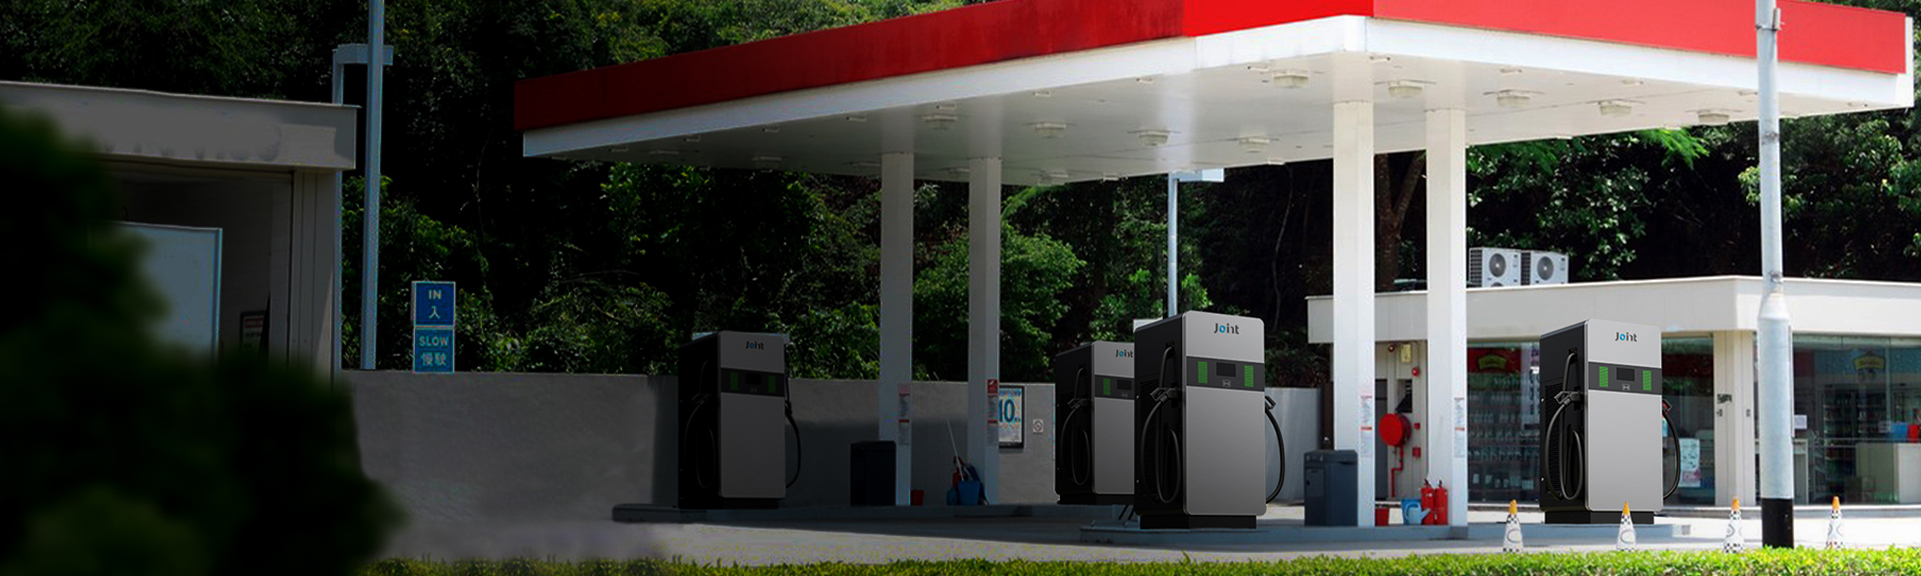 As an electric vehicle charger wholesaler, Joint provides gas station charging solutions